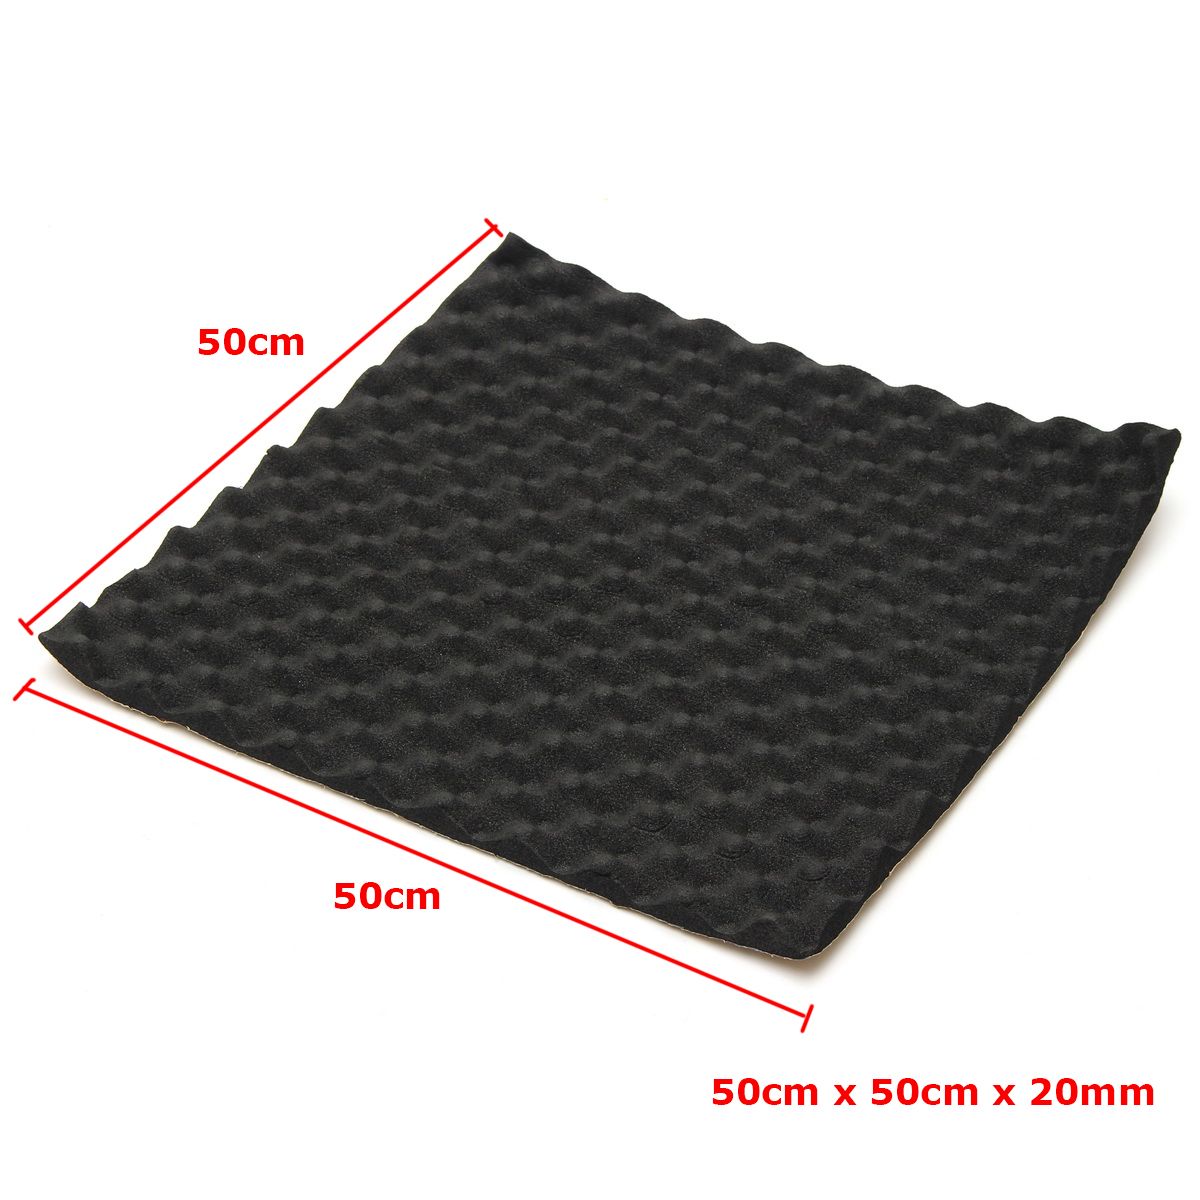 20mm-Sound-Absorber-Acoustic-Foam-Self-adhesive-for-Studio-50x50cm-1129735